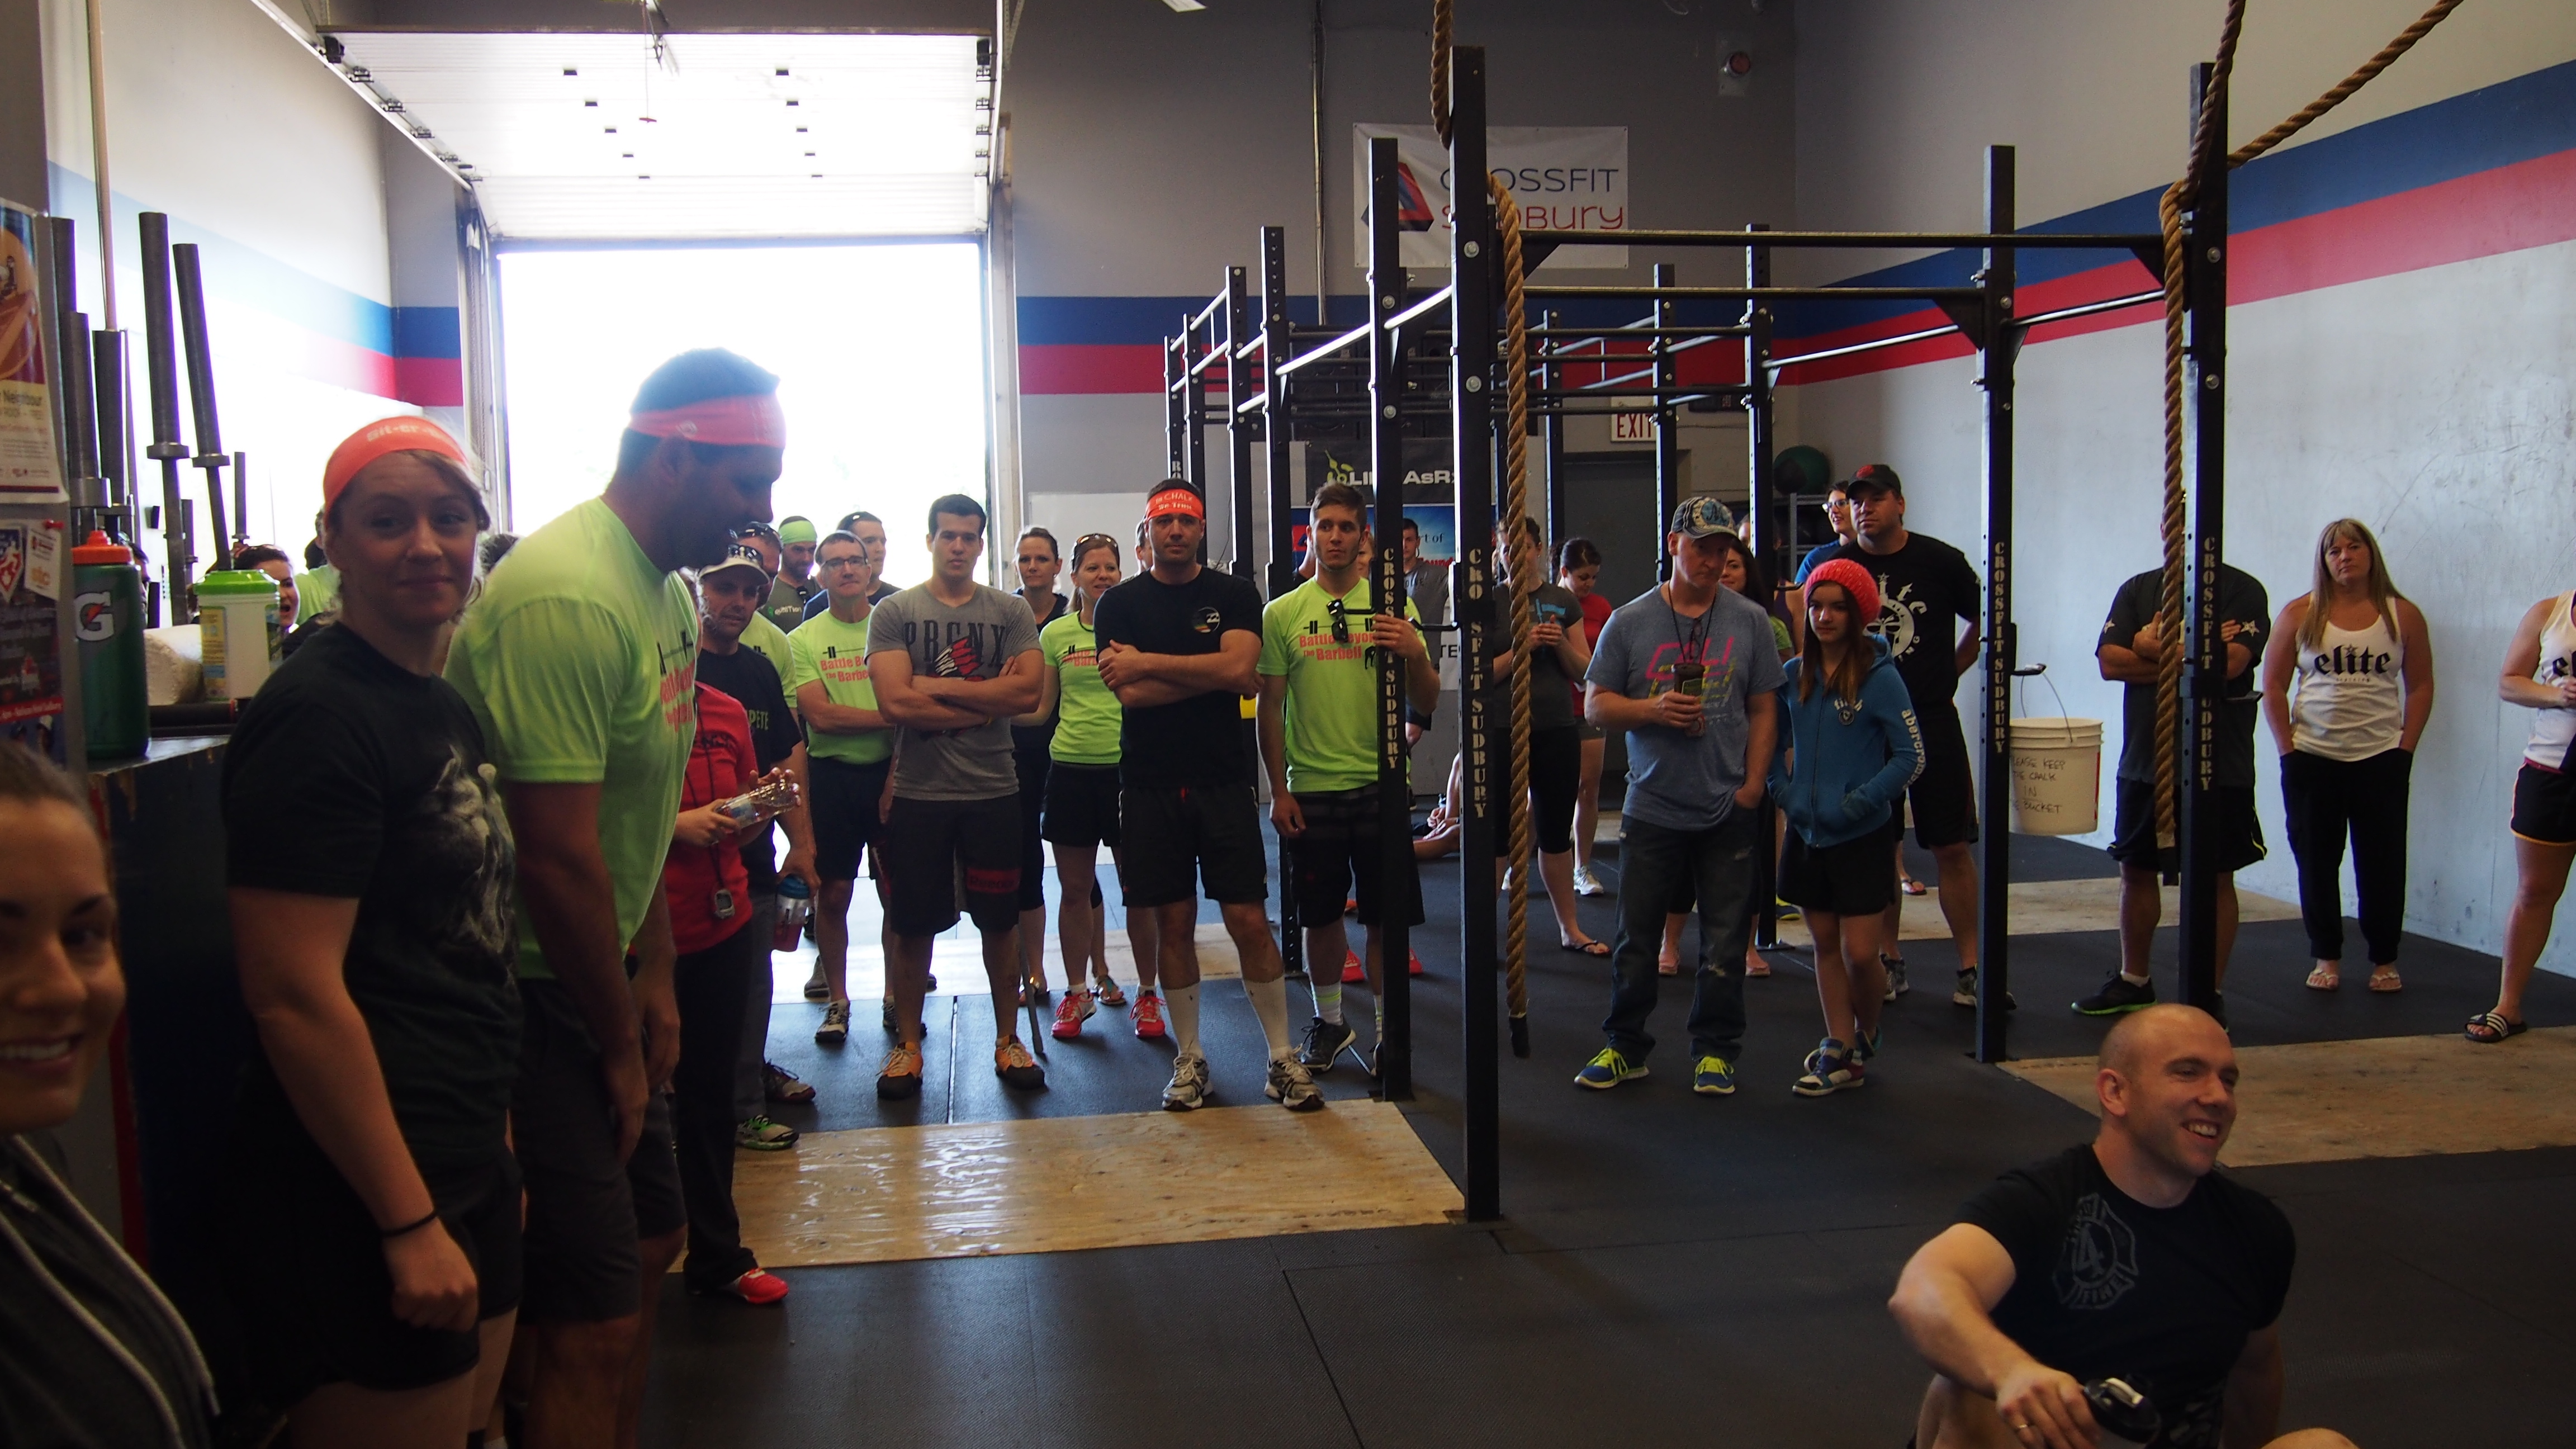 Battle Beyond the Barbell 2014 – Results & Thank You!